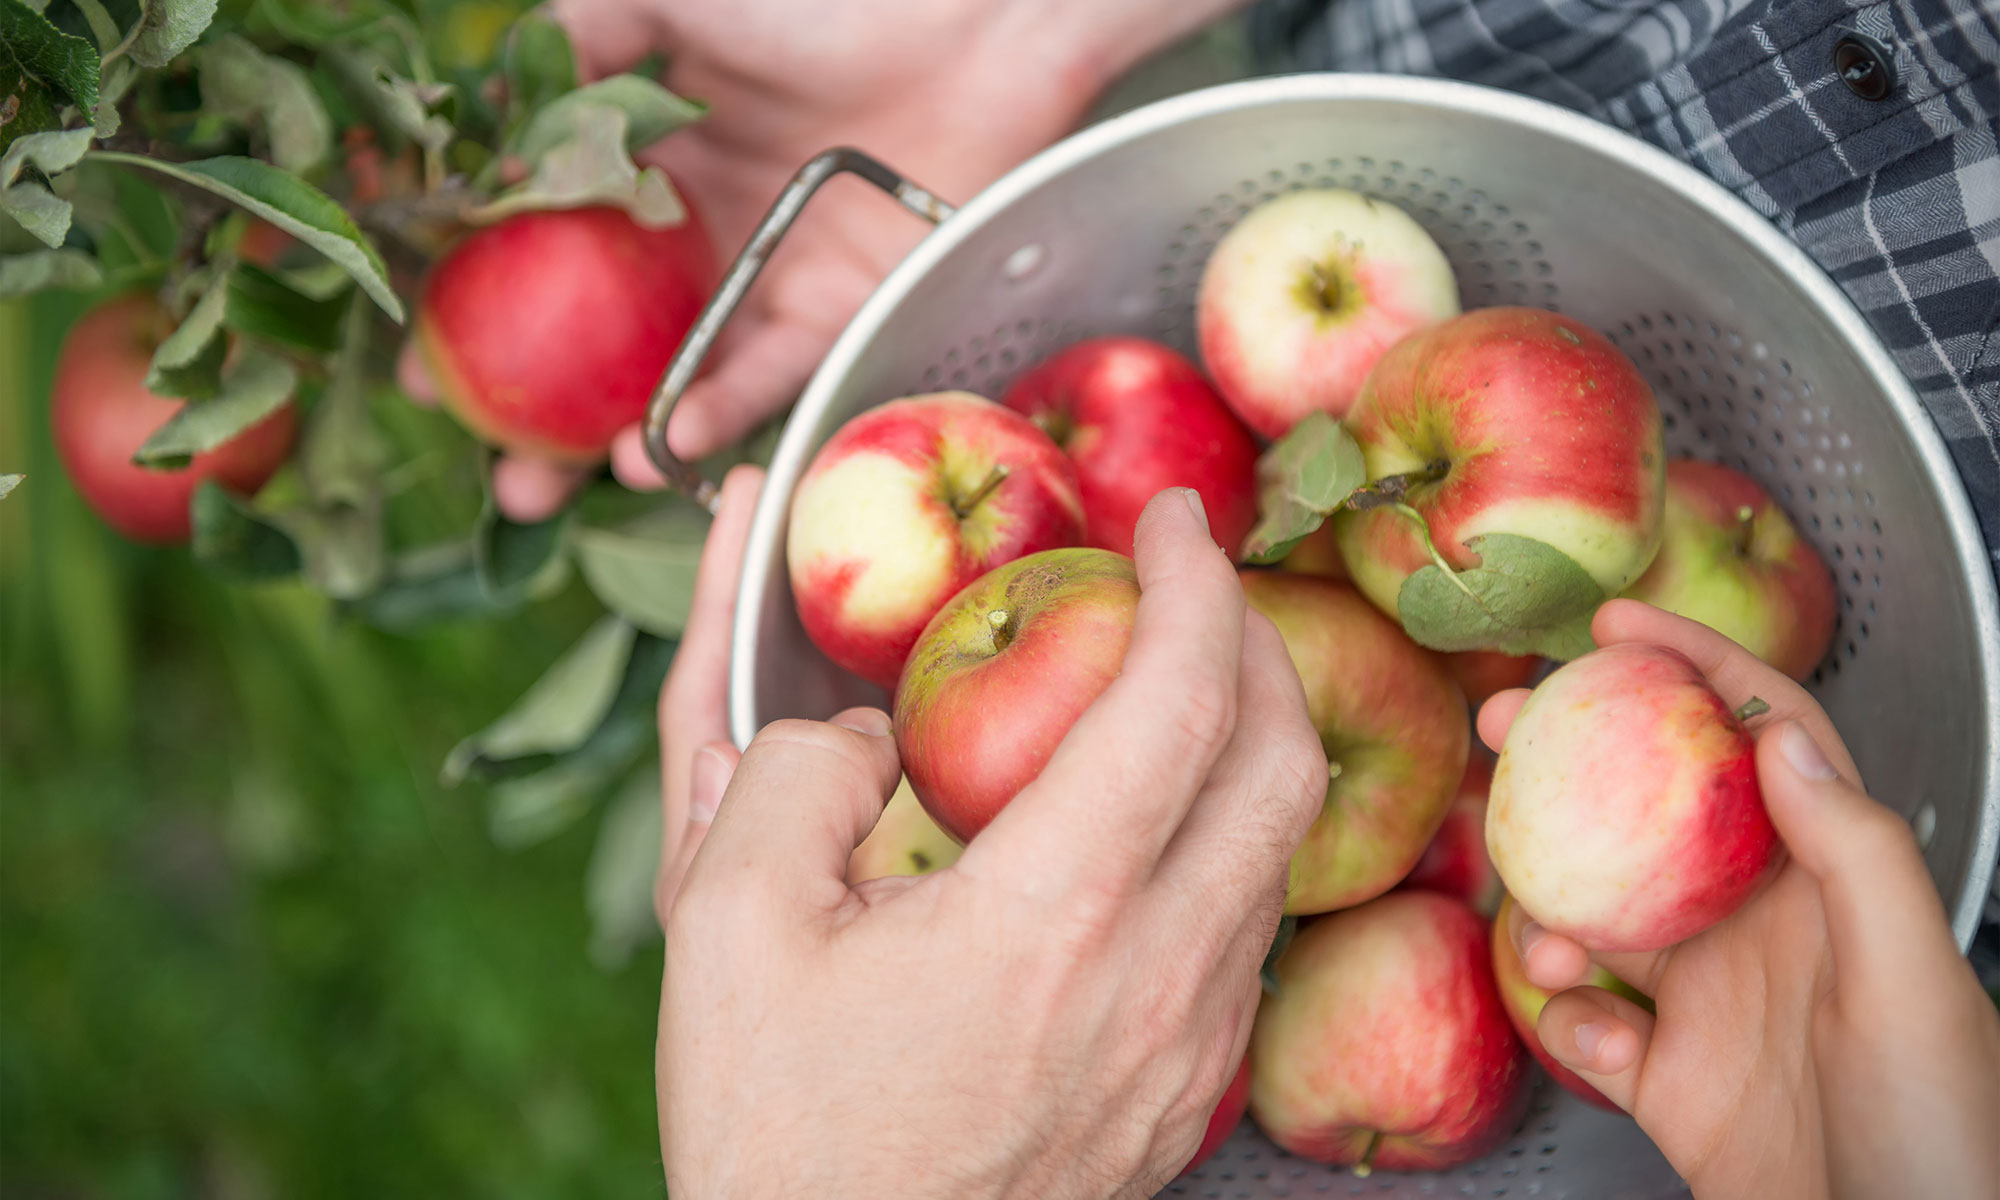 Hands picking red apples and putting them in a bucket.